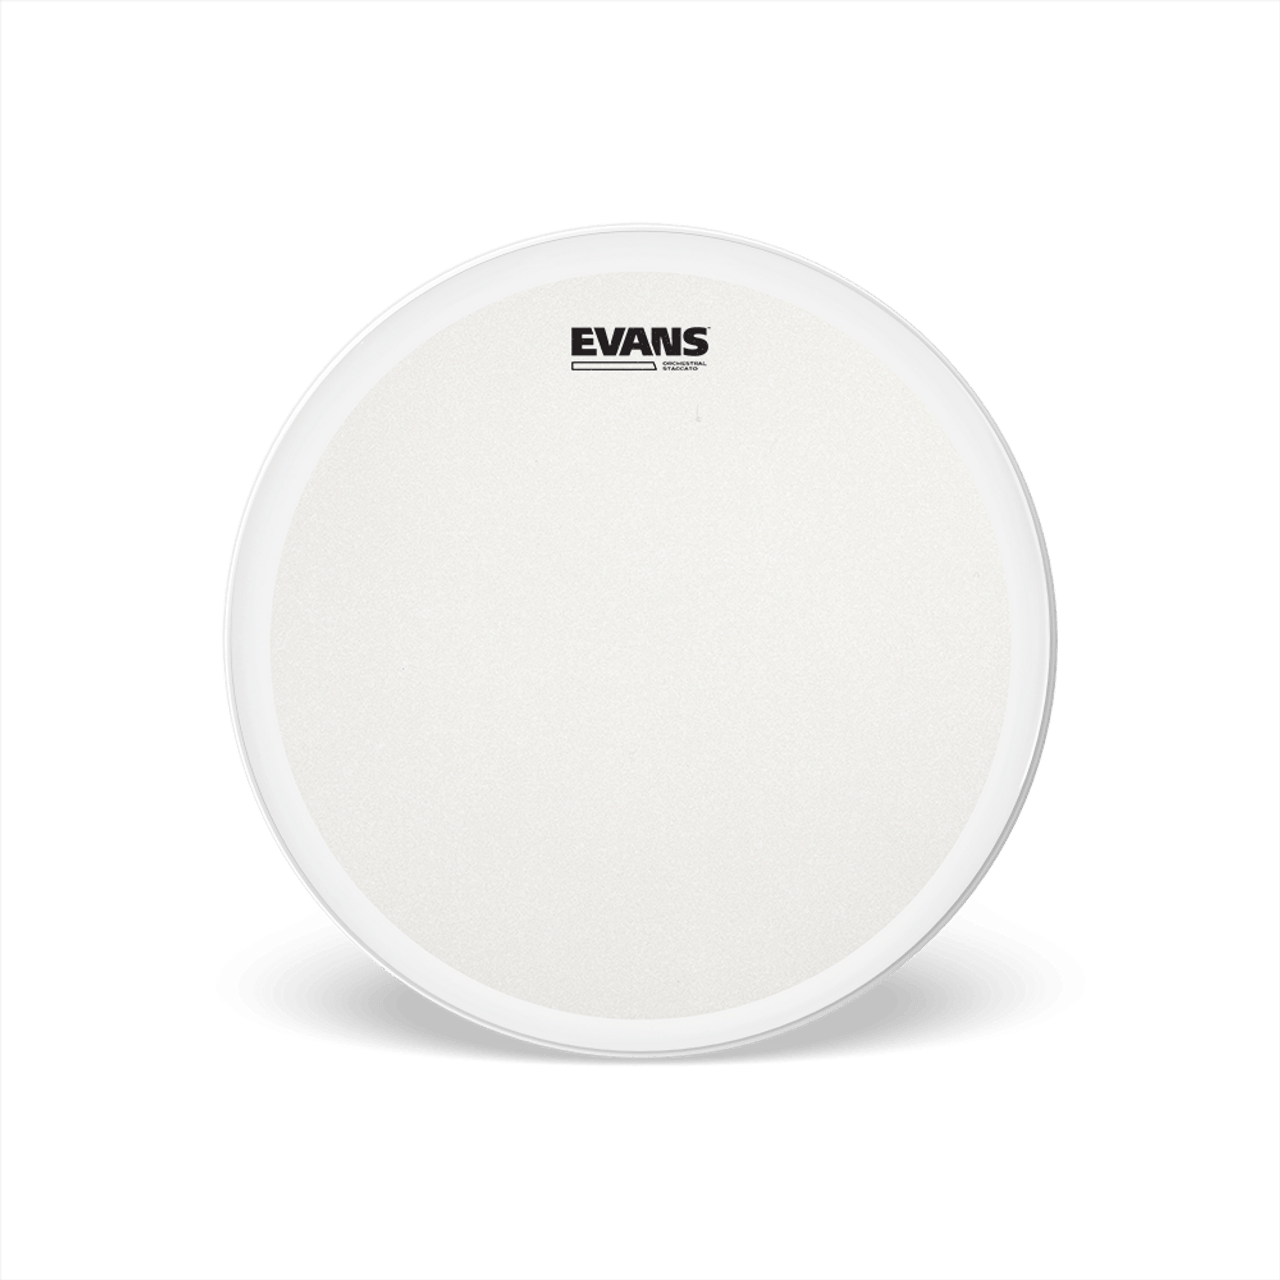 Evans Orchestral Staccato Coated White Snare Drum Head, 14 Inch